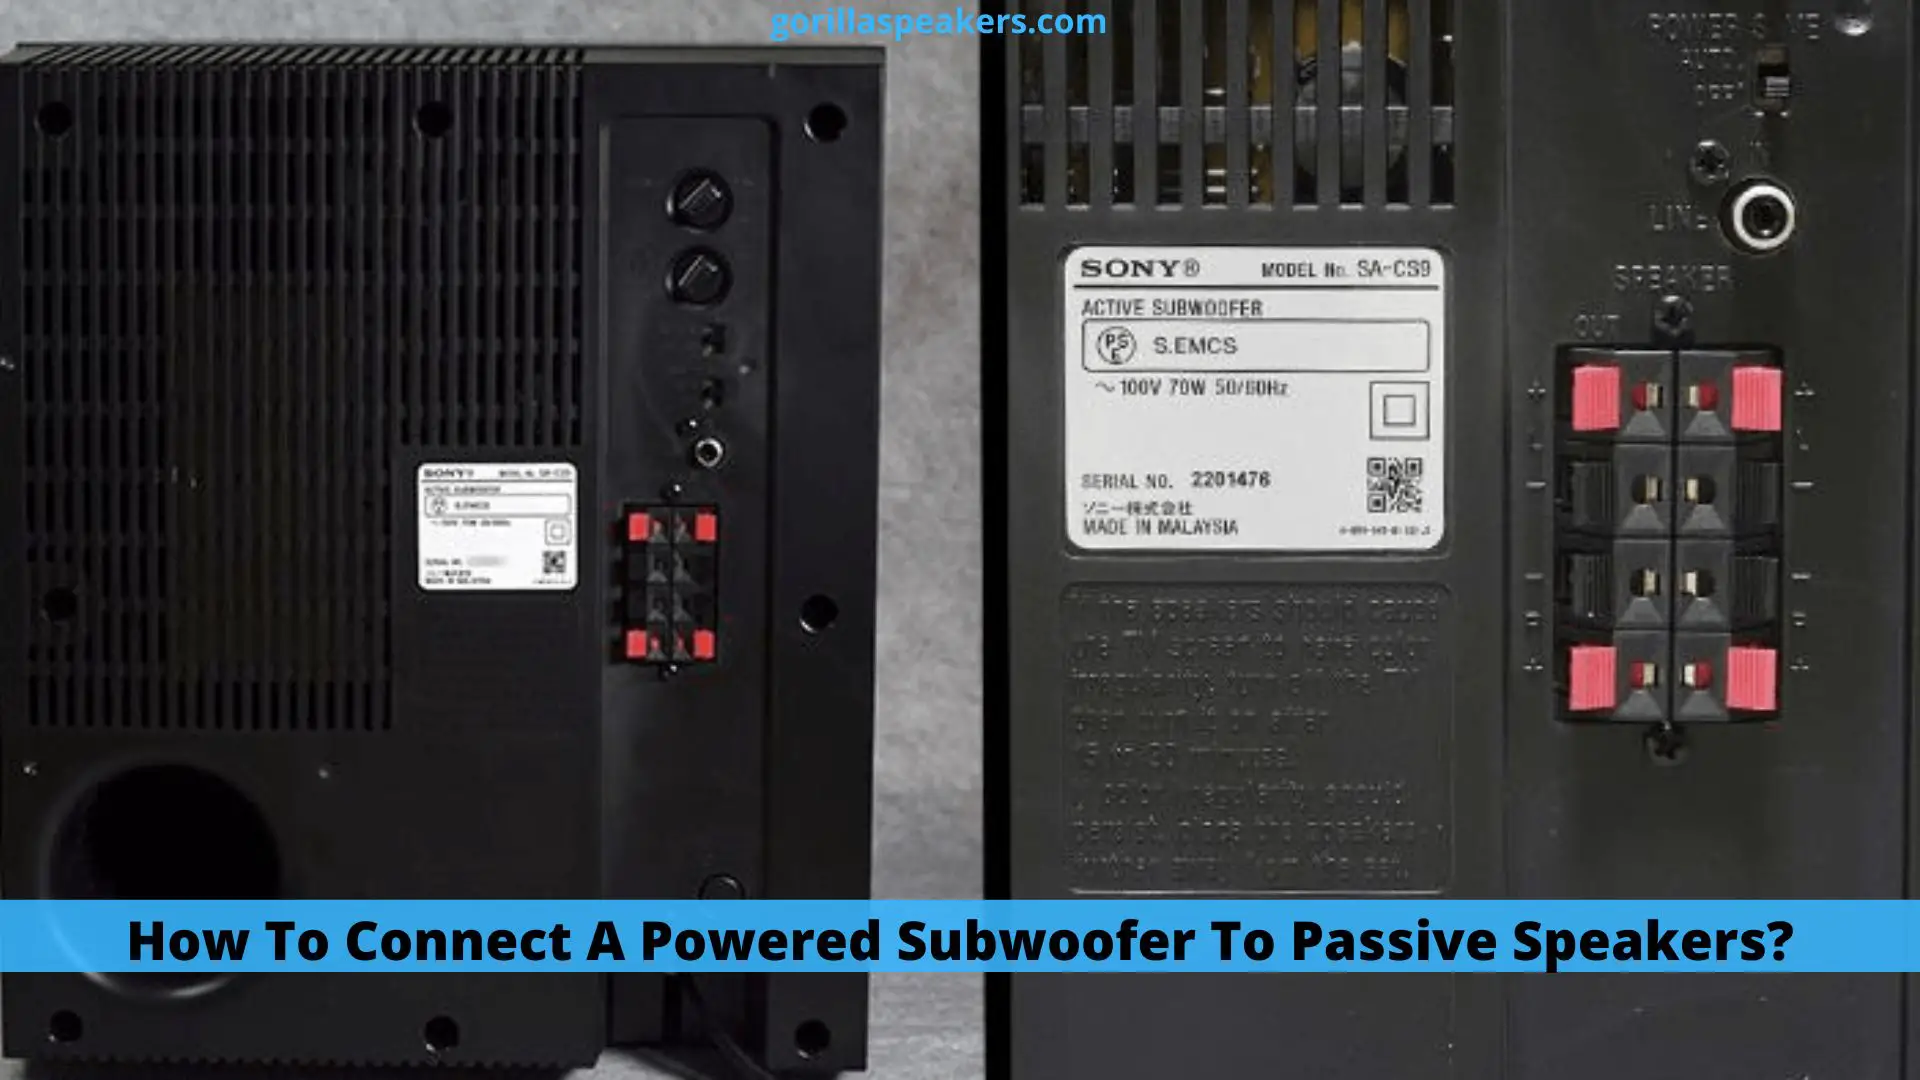 How To Connect A Powered Subwoofer To Passive Speakers?